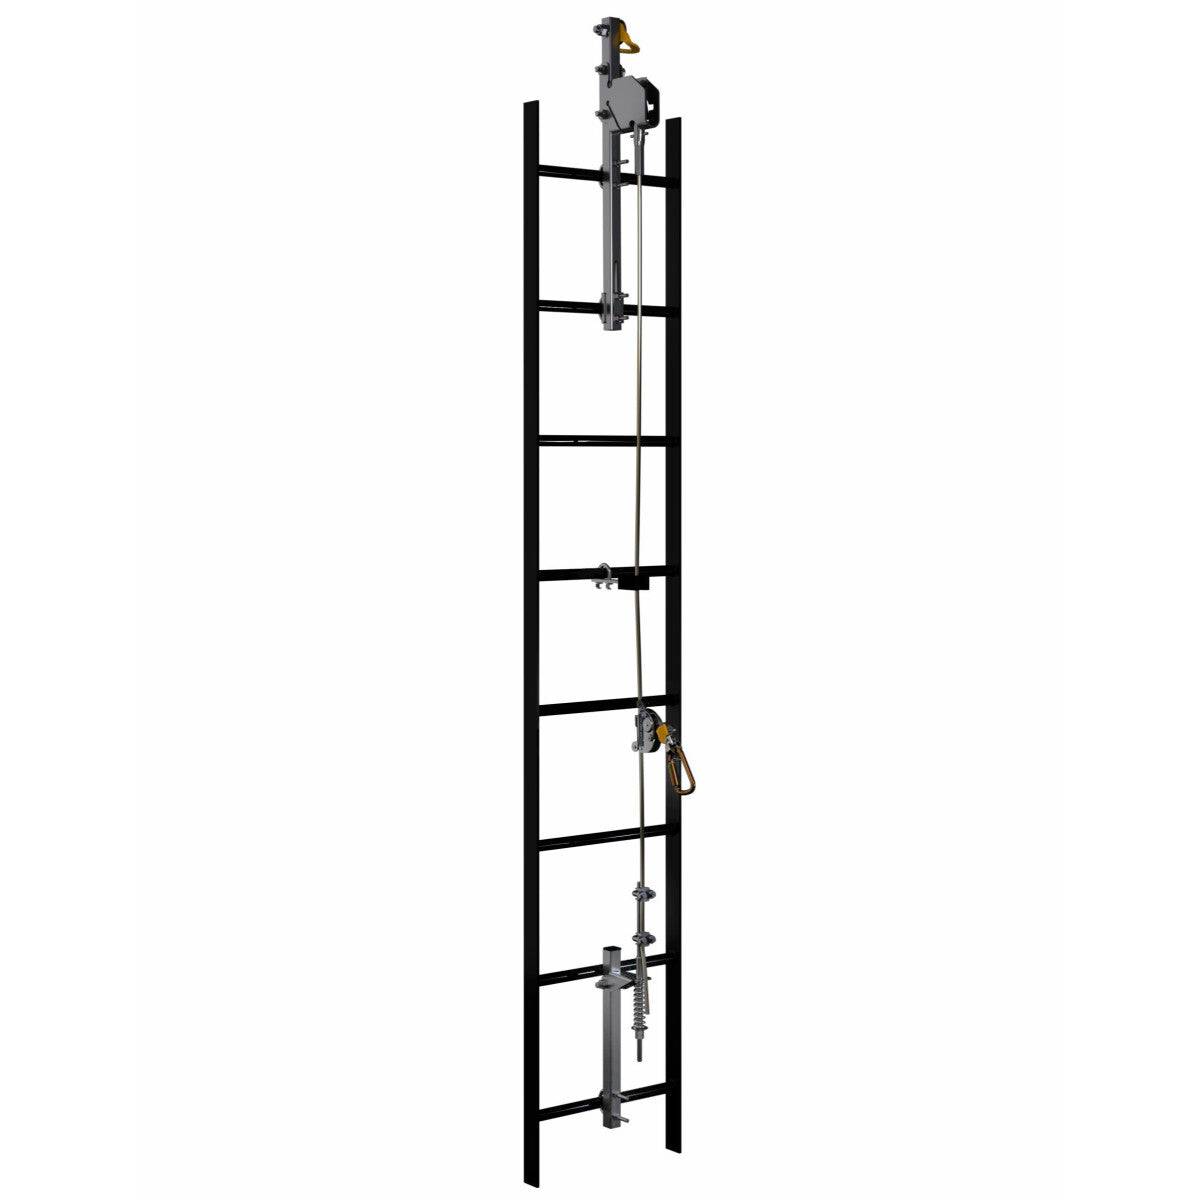 3M DBI SALA Lad-Saf Stainless Steel Cable Vertical Safety System Bracketry - 2 User 6116632 - SecureHeights